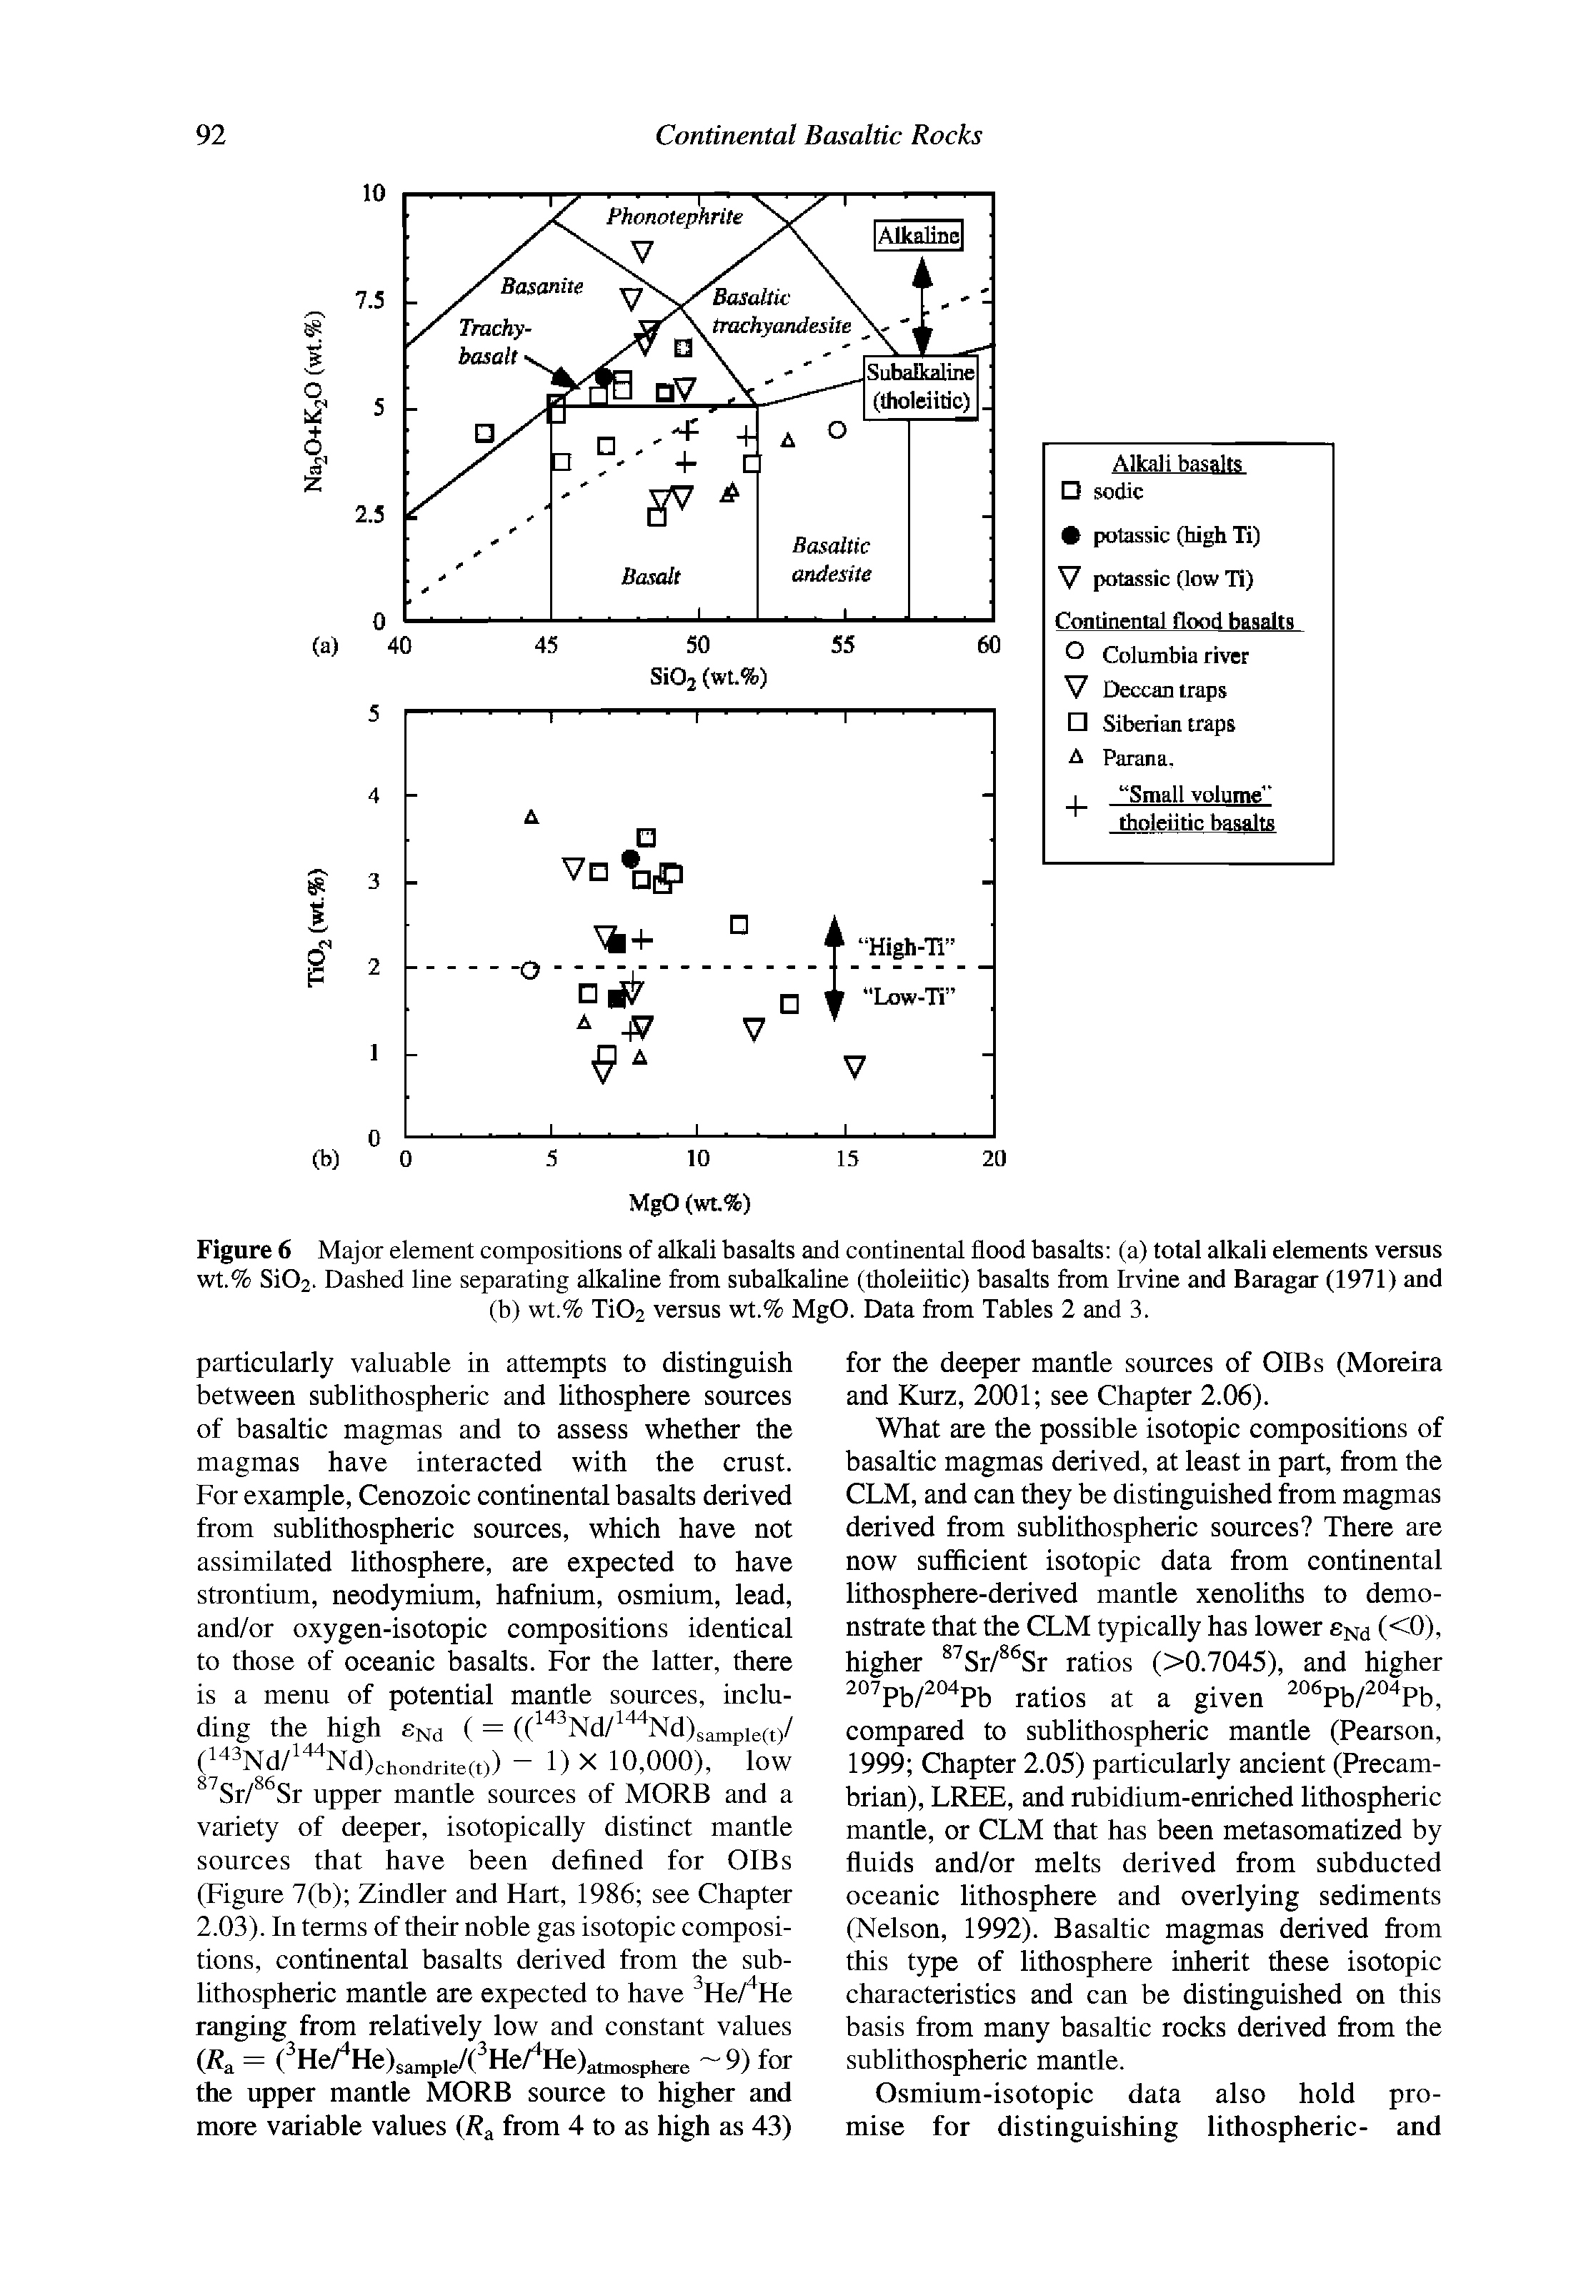 Figure 6 Major element compositions of alkali basalts and continental flood basalts (a) total alkali elements versus wt.% Si02- Dashed line separating alkaline from subalkaline (tholeiitic) basalts from Irvine and Baragar (1971) and (b) wt.% Ti02 versus wt.% MgO. Data from Tables 2 and 3.